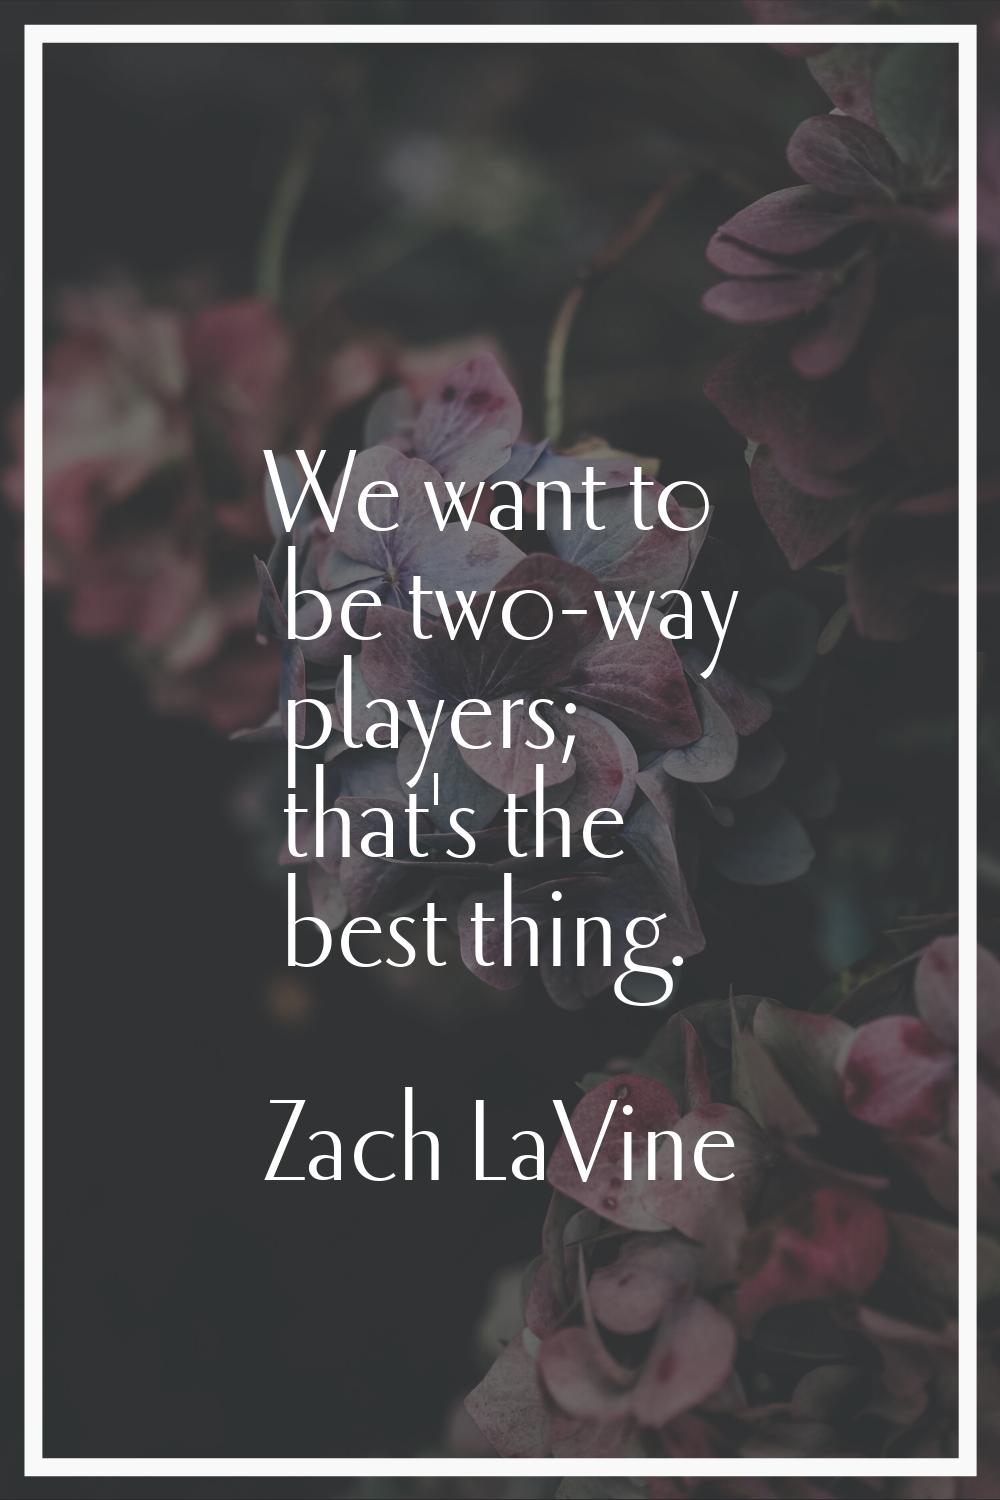 We want to be two-way players; that's the best thing.